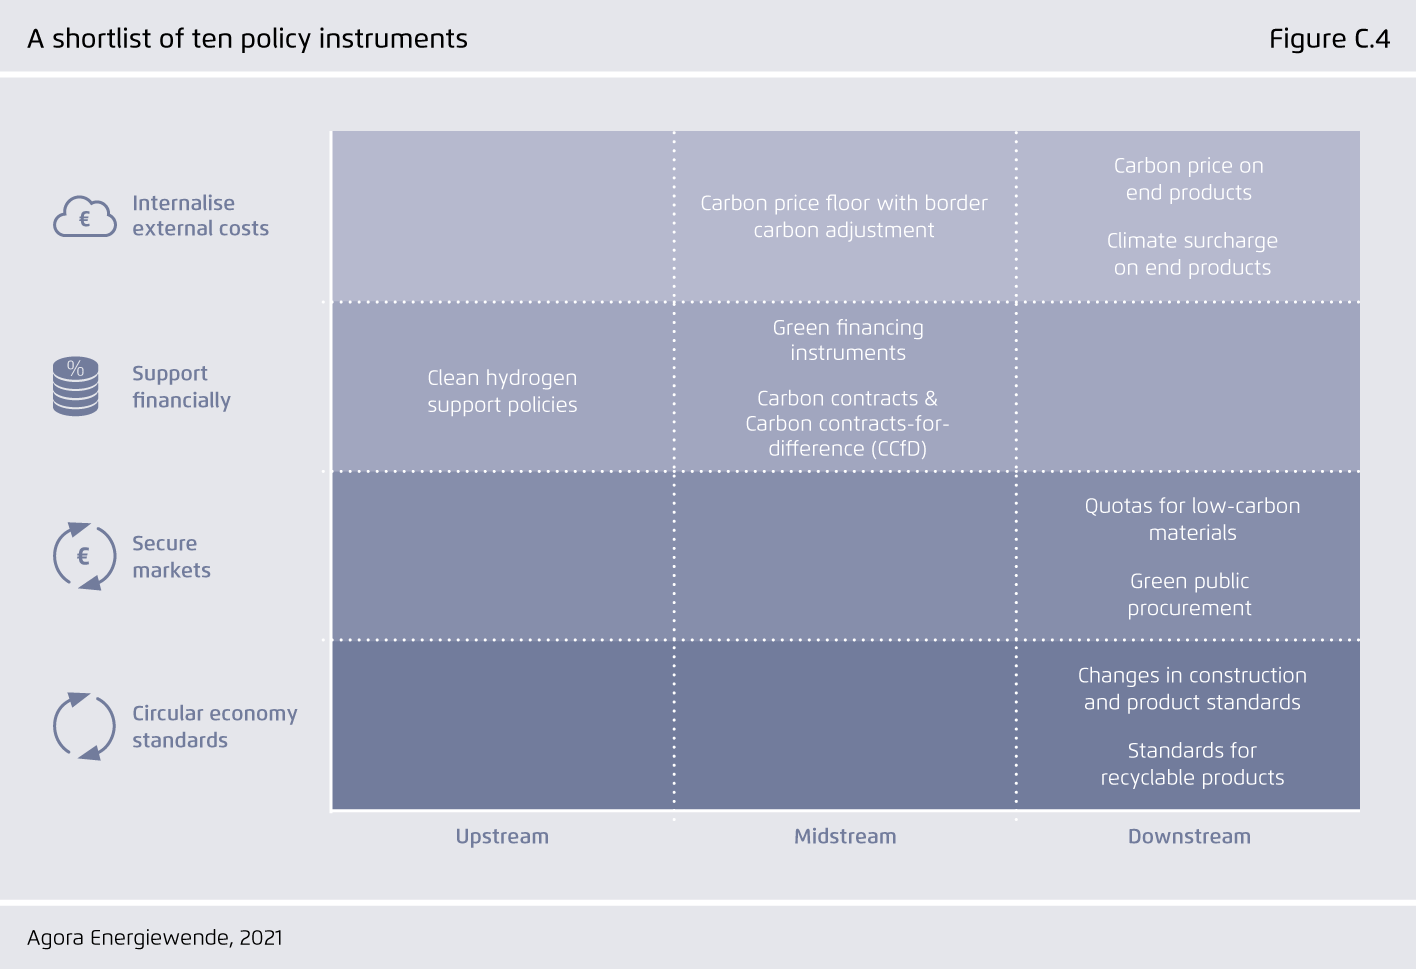 Preview for A shortlist of ten policy instruments